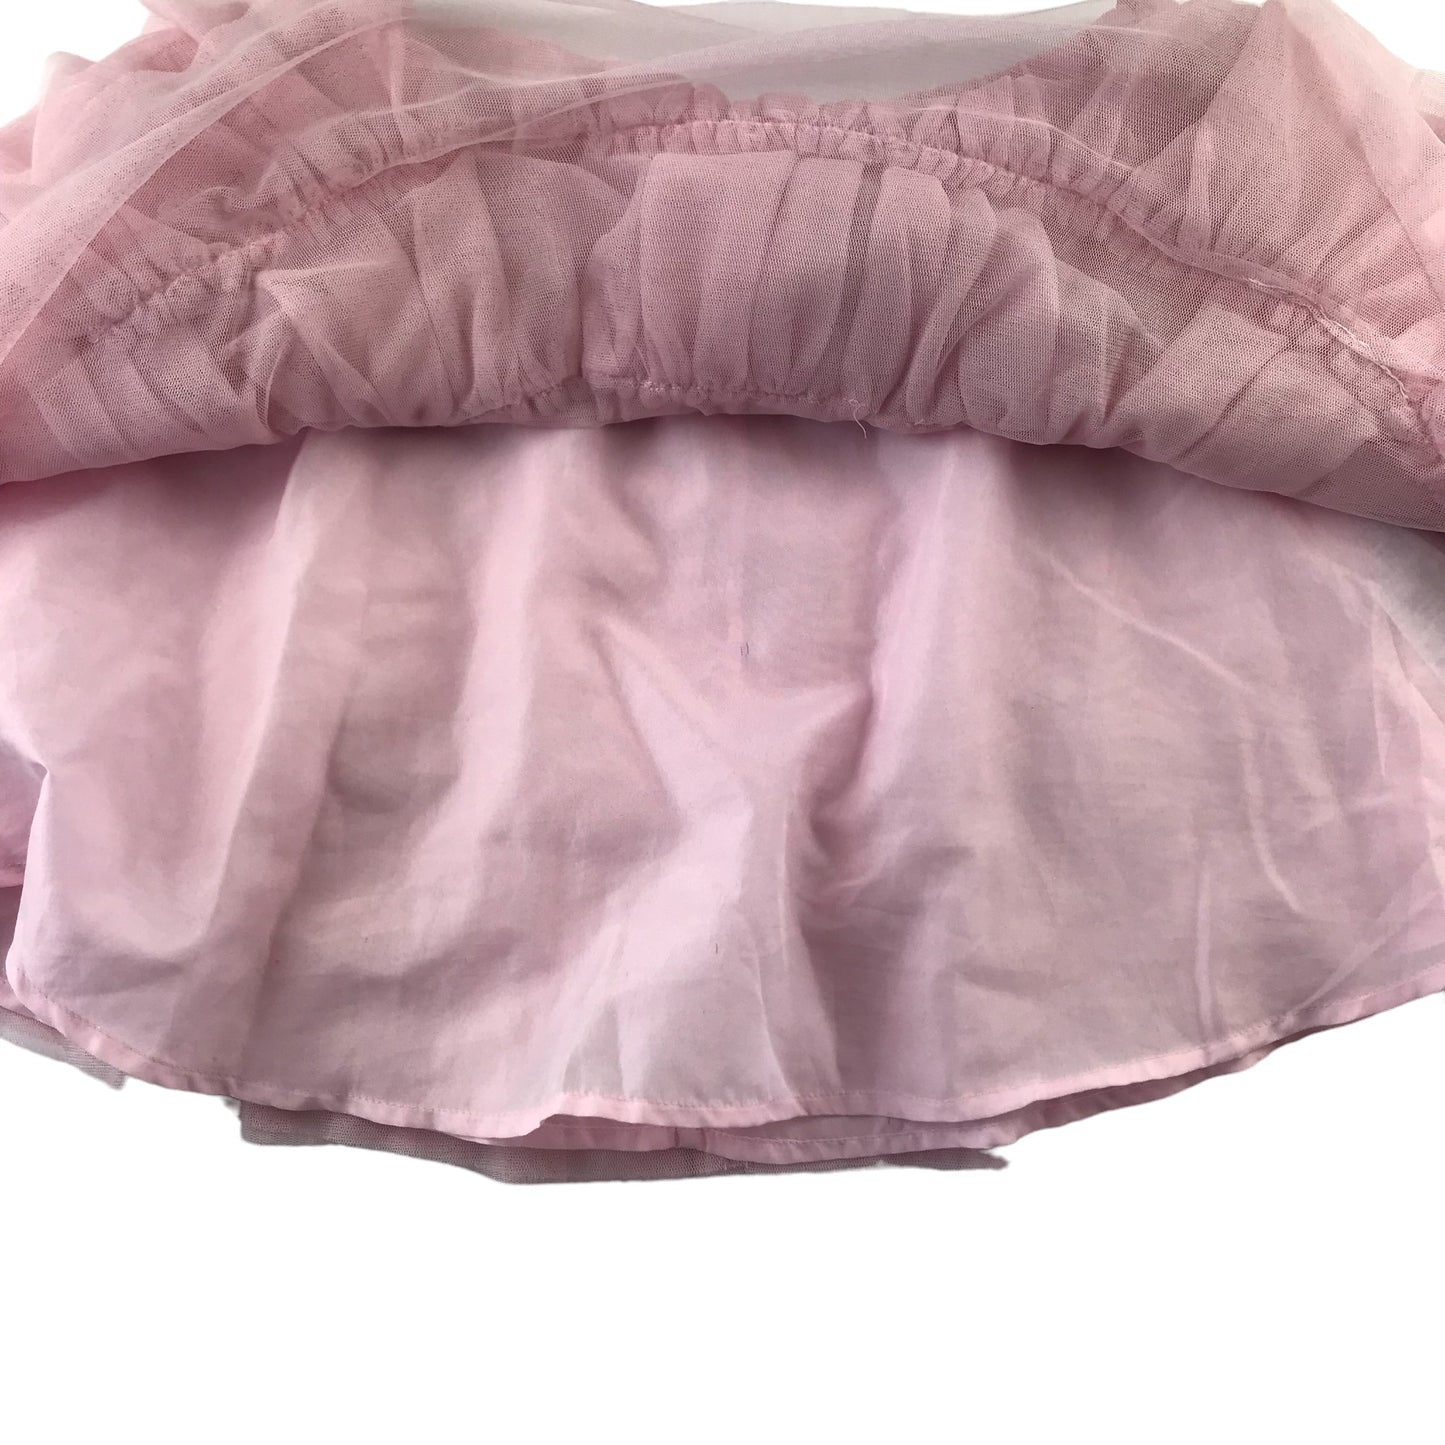 Mini Boden Skirt Age 13 Pink Layered Tulle